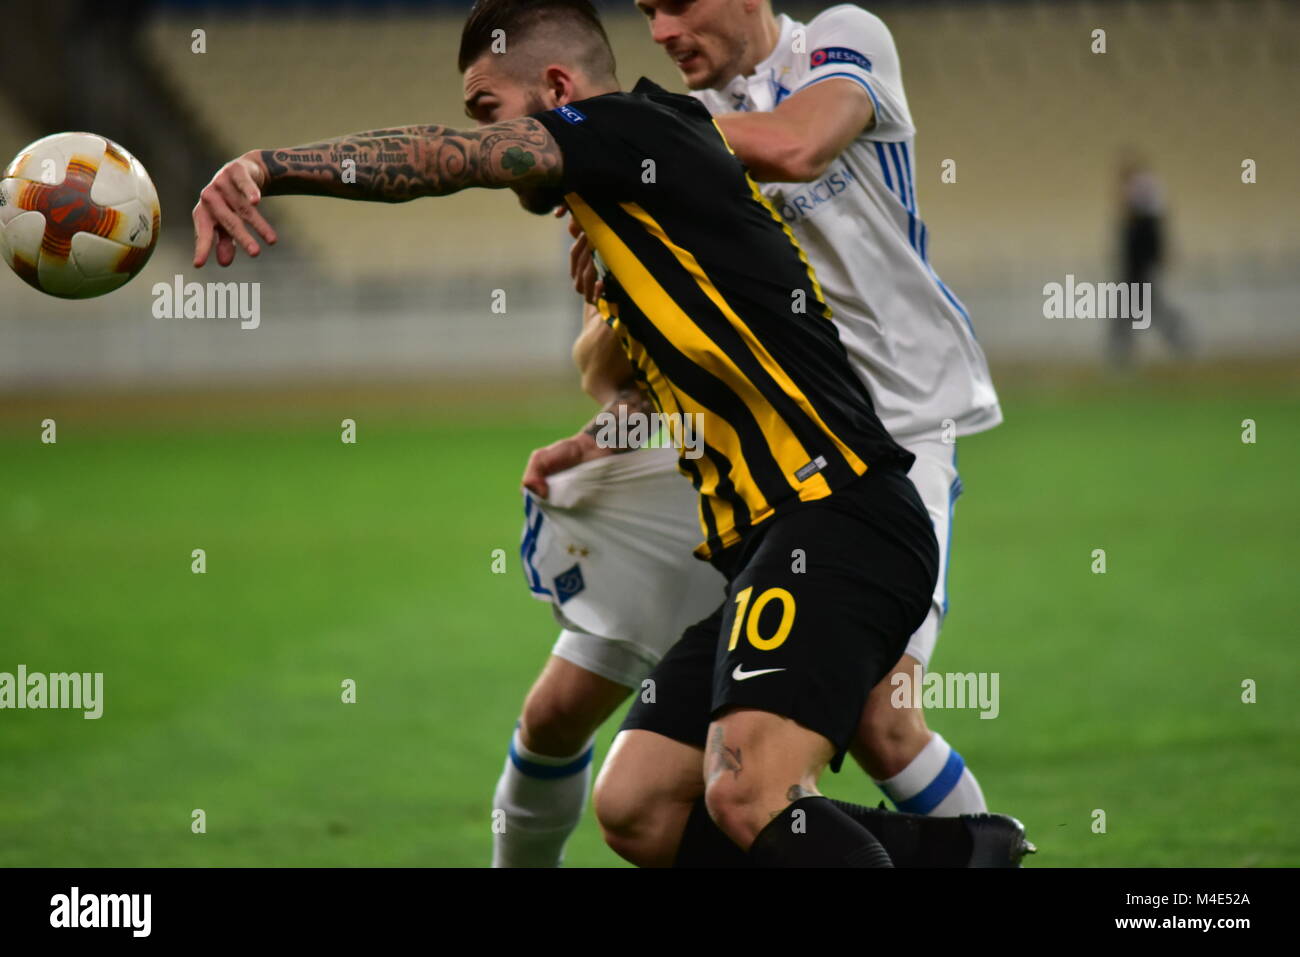 Athens, Greece. 15th Feb, 2018. Marko Livaja (no 10) of AEK tries to hold  the possession of the ball, during the match. Credit: Dimitrios  Karvountzis/Pacific Press/Alamy Live News Stock Photo - Alamy